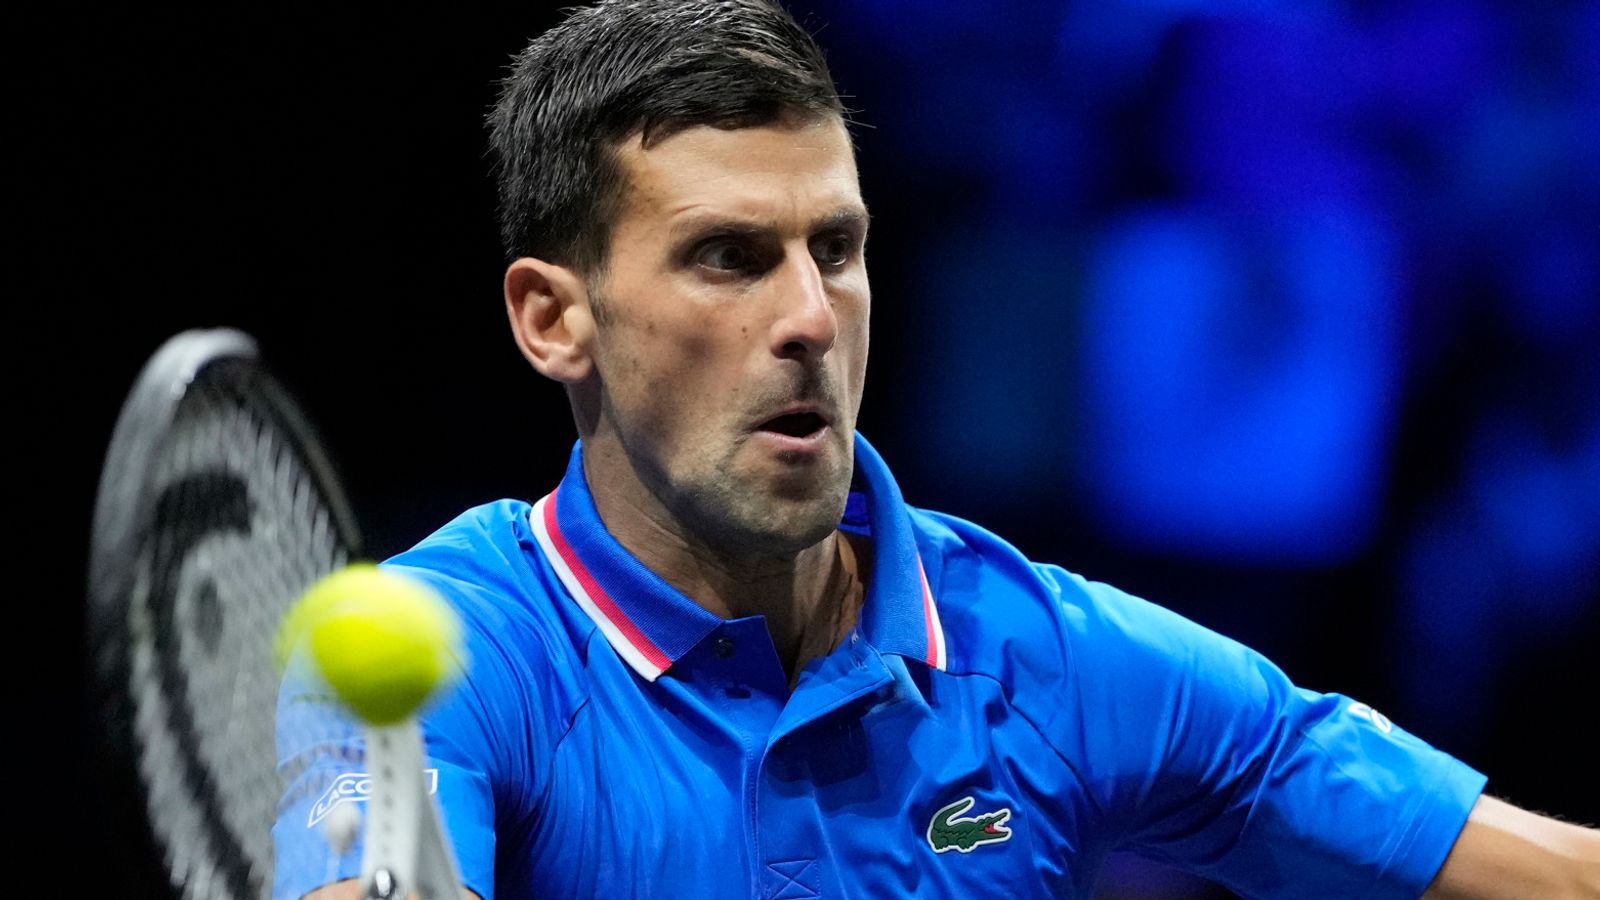 Laver Cup: Novak Djokovic wins twice in same session to move Team Europe 8-4 ahead in London